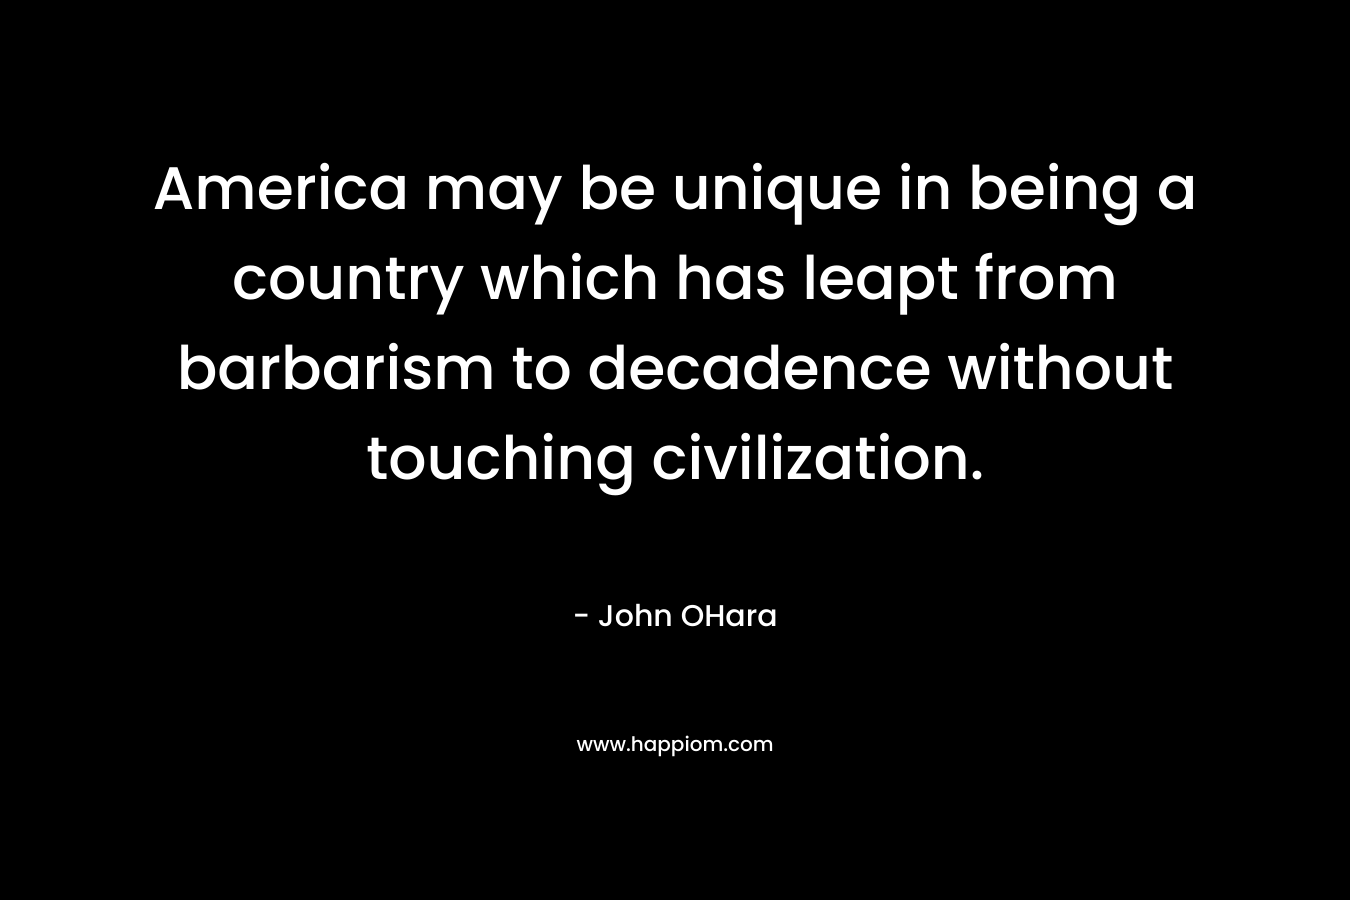 America may be unique in being a country which has leapt from barbarism to decadence without touching civilization. – John OHara